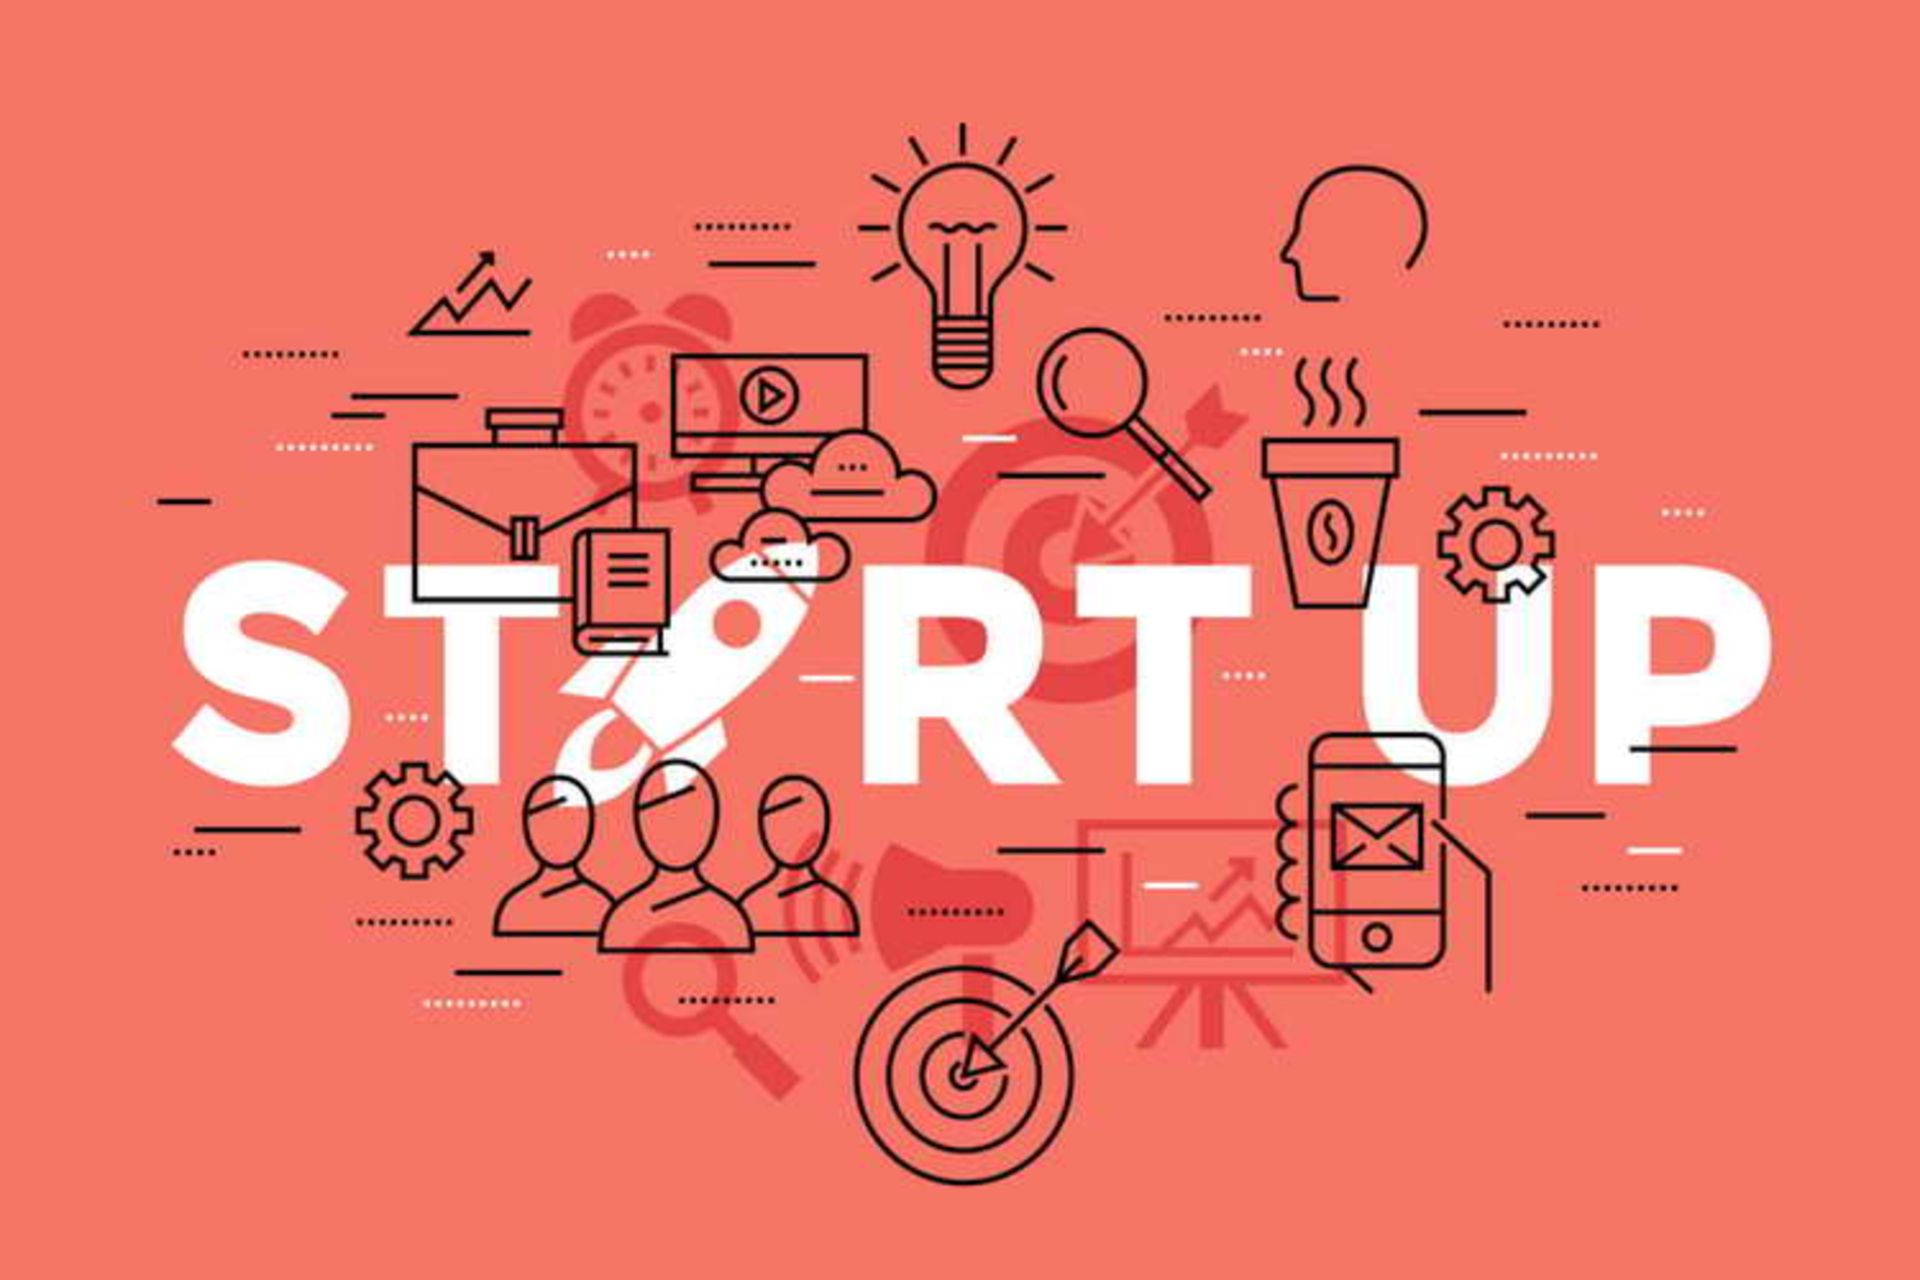  FROM STARTUP TO SCALEUP